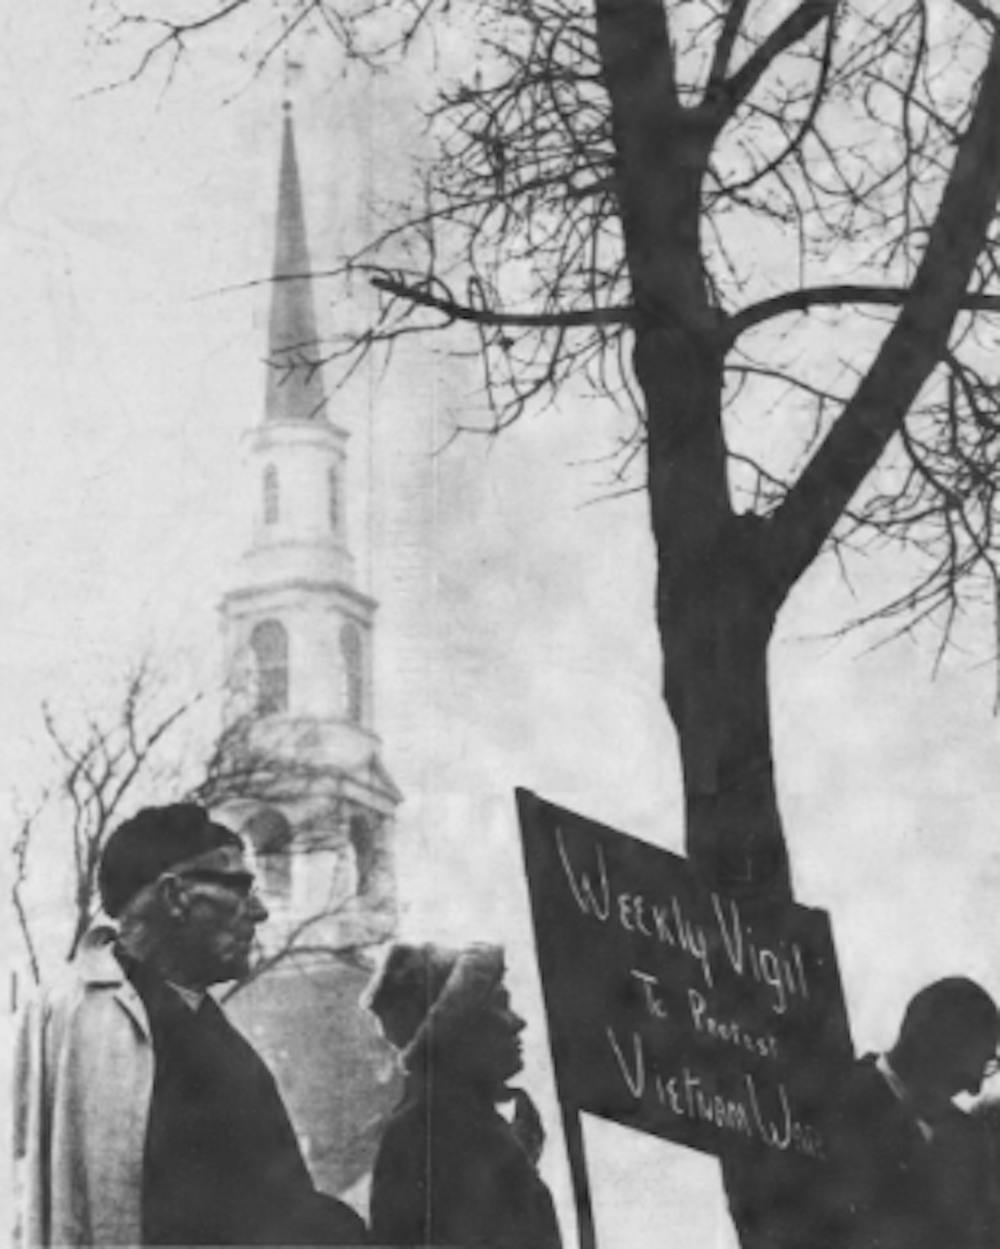 DTH Archive, Jan. 5, 1967. The first weekly peace watch was held yesterday afternoon with up to 100 to 150 protestors in attendance. Photo by Jock Lauterer.